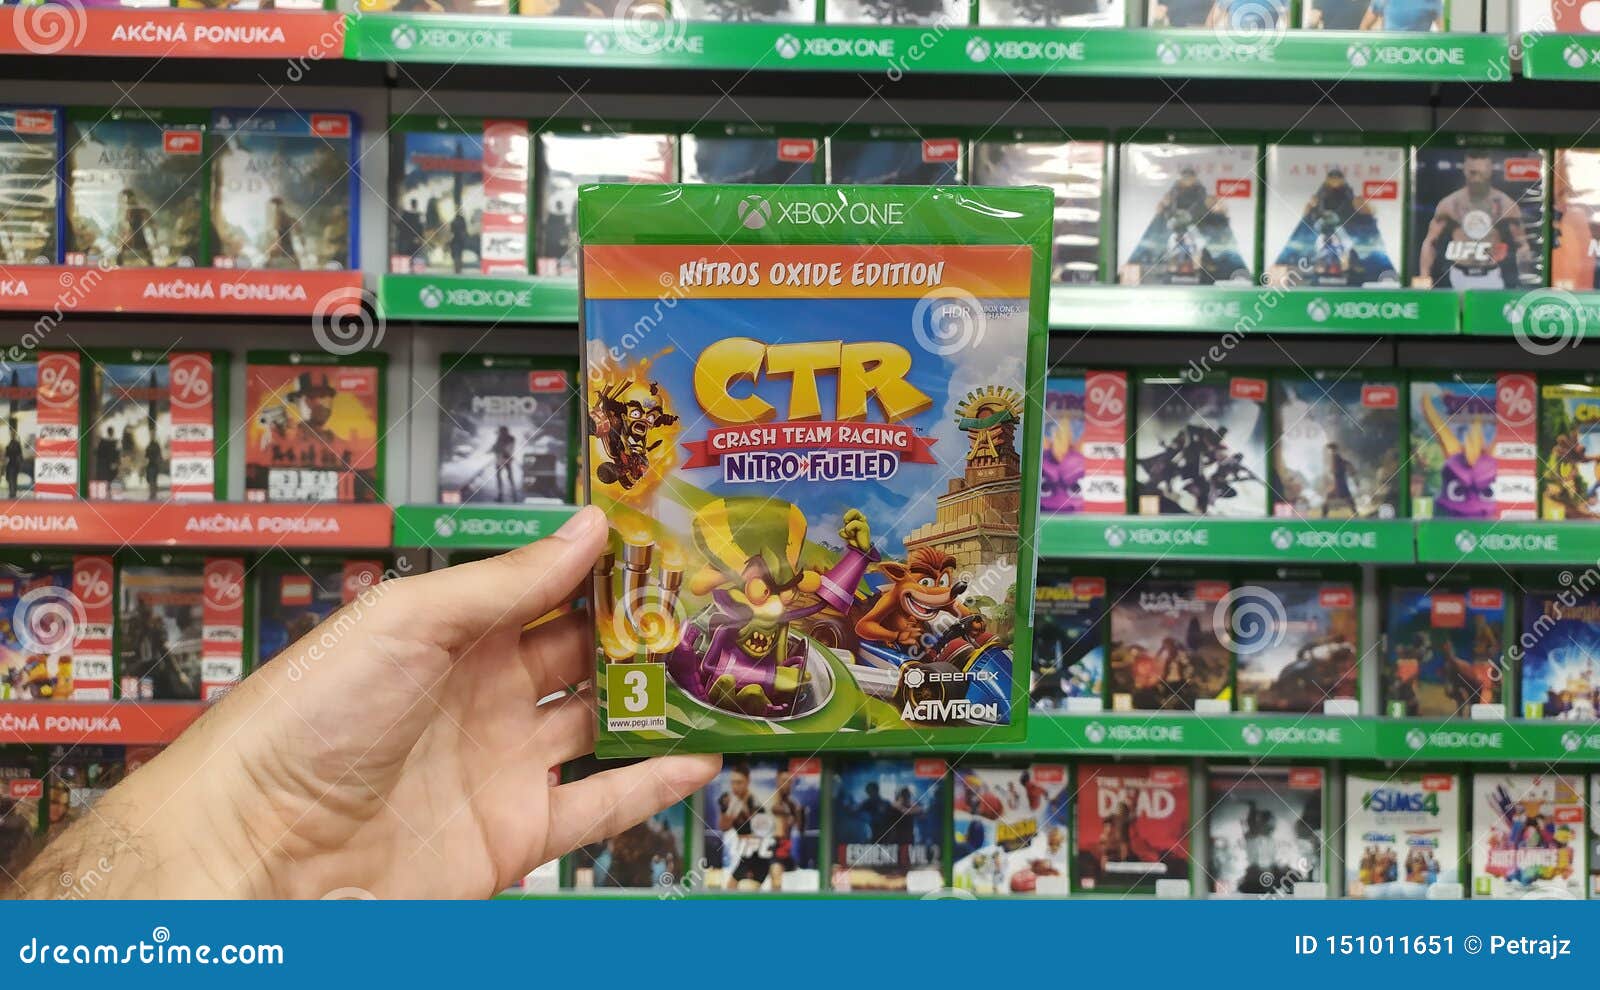 visual Matemáticas Hito Crash Team Racing Nitro Fueled Videogame on Microsoft XBOX One Console in  Store Editorial Photo - Image of control, illustrative: 151011651